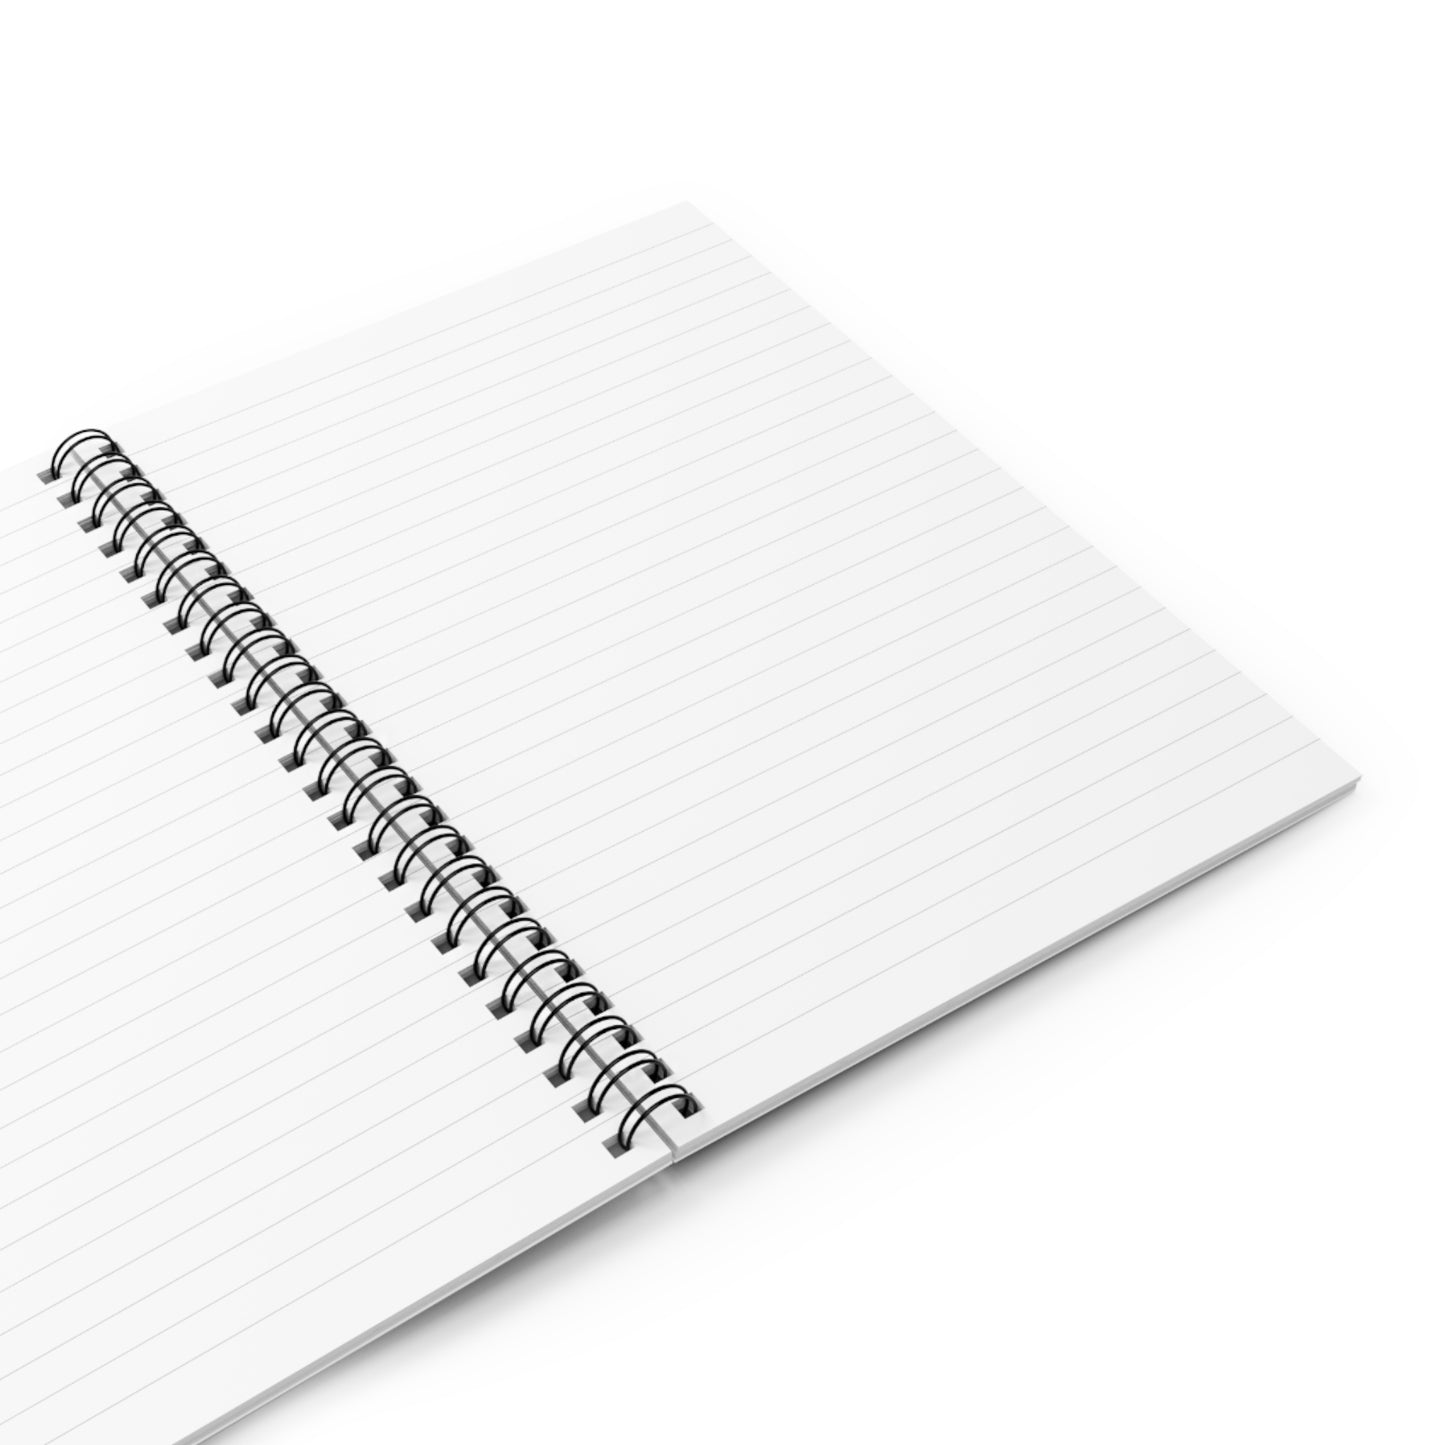 Toe Beans Spiral Notebook - Ruled Line